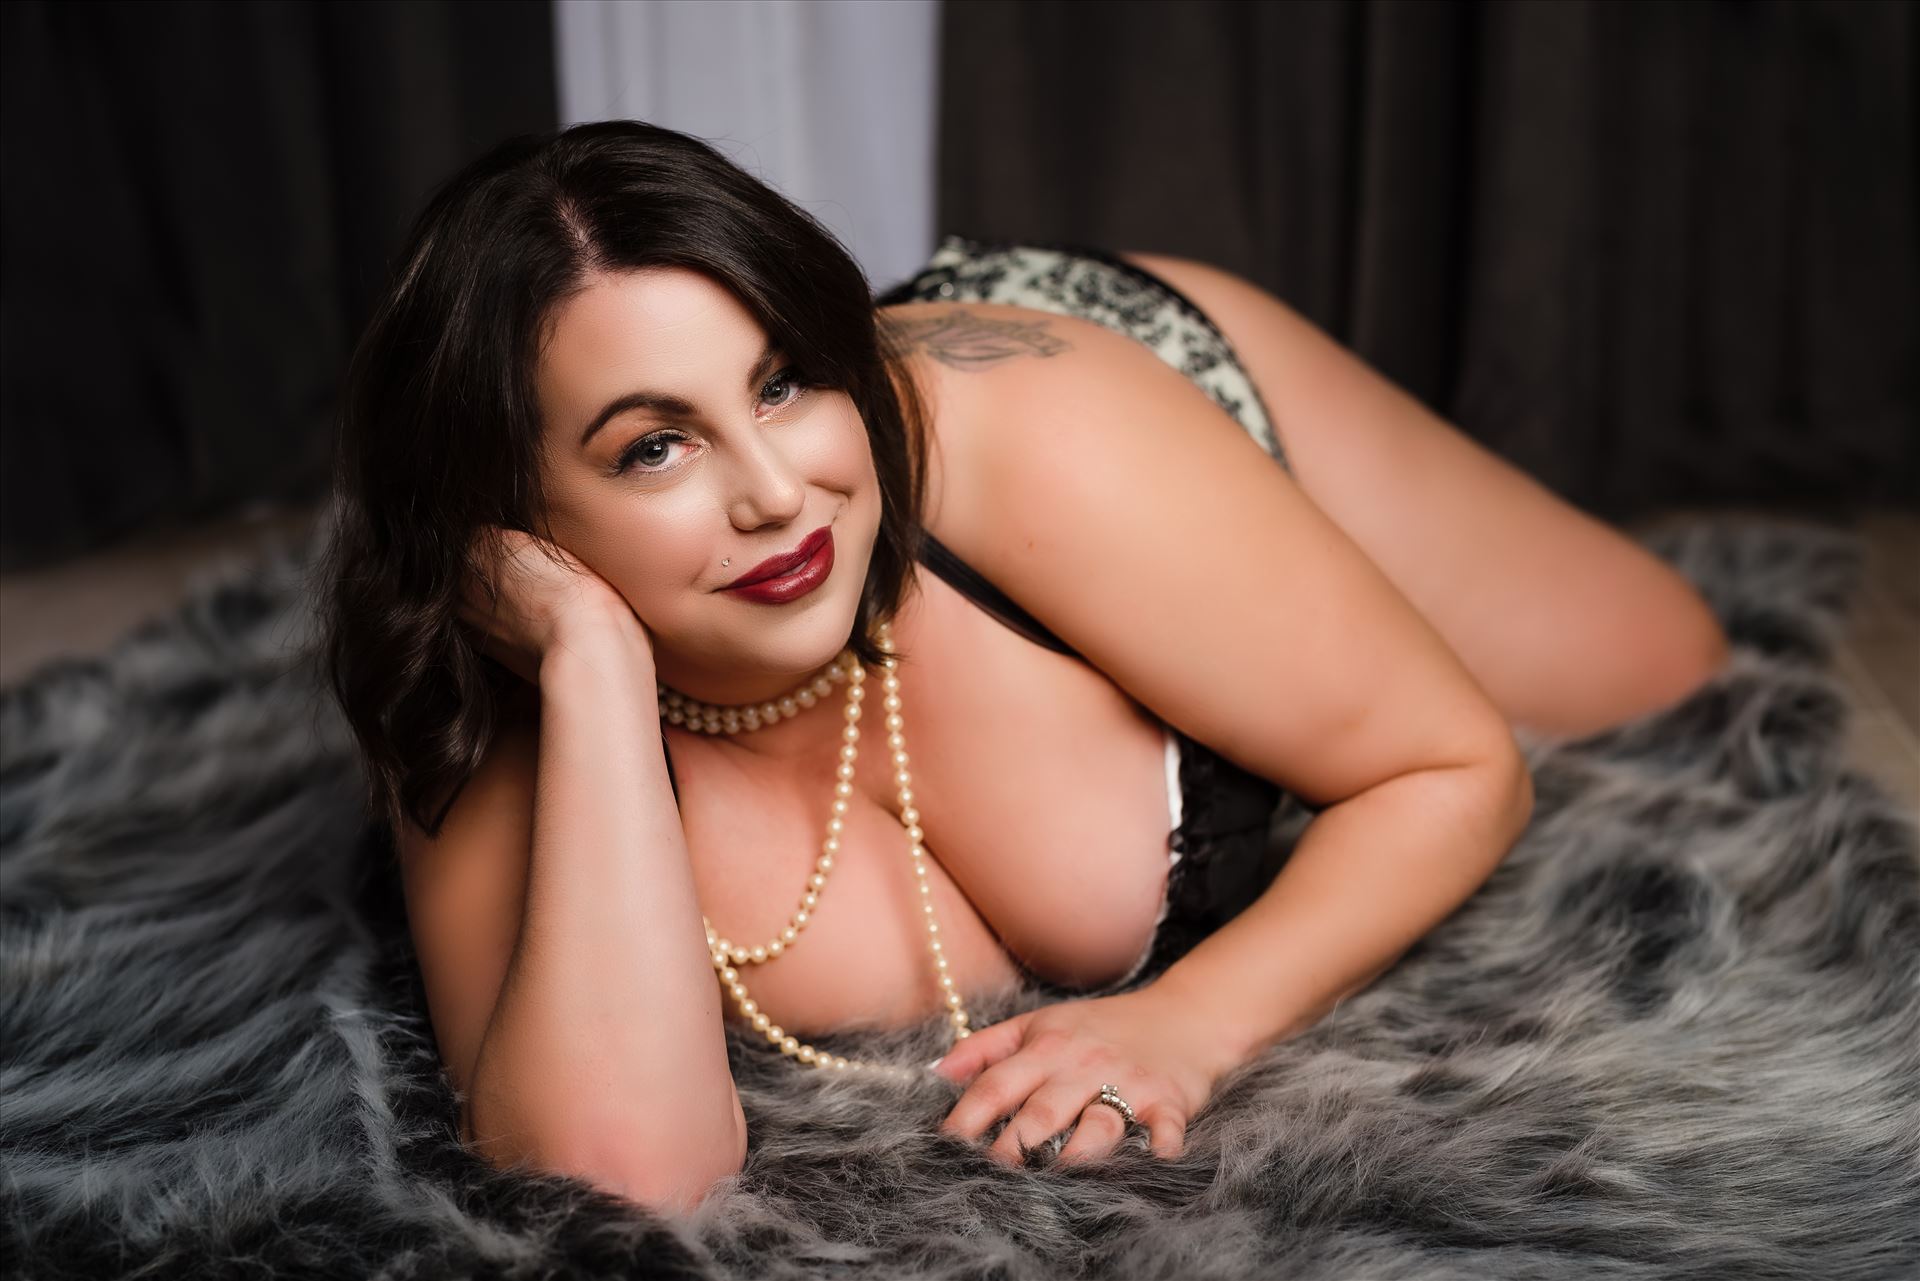 port nw-6084.JPG - Beachfront Boudoir by Mirror's Edge Photography is a Boutique Luxury Boudoir Photography Studio located just blocks from the beach in Oceano, California. My mission is to show as many women as possible how beautiful they truly are! by Sarah Williams